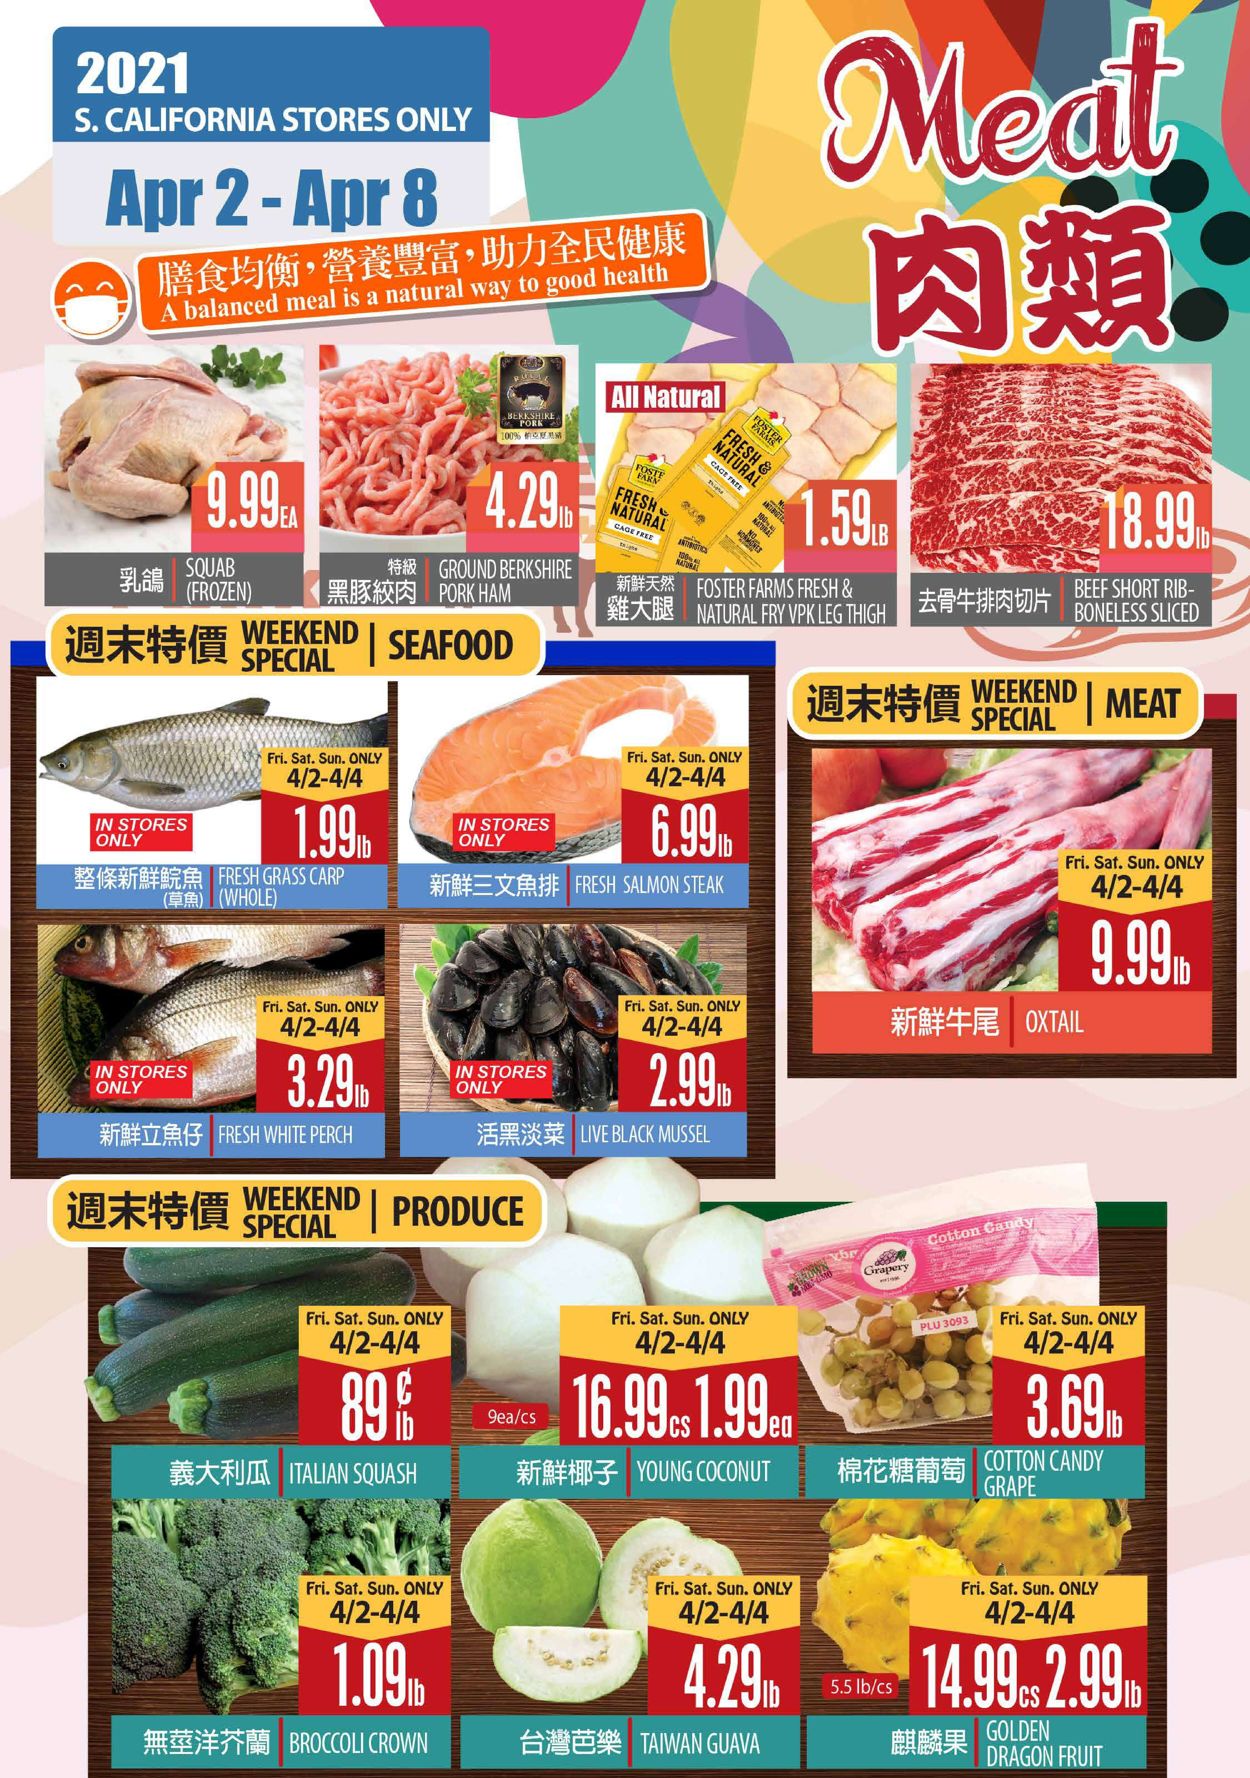 99 Ranch - Easter 2021 Ad Current weekly ad 04/02 - 04/08/2021 [2